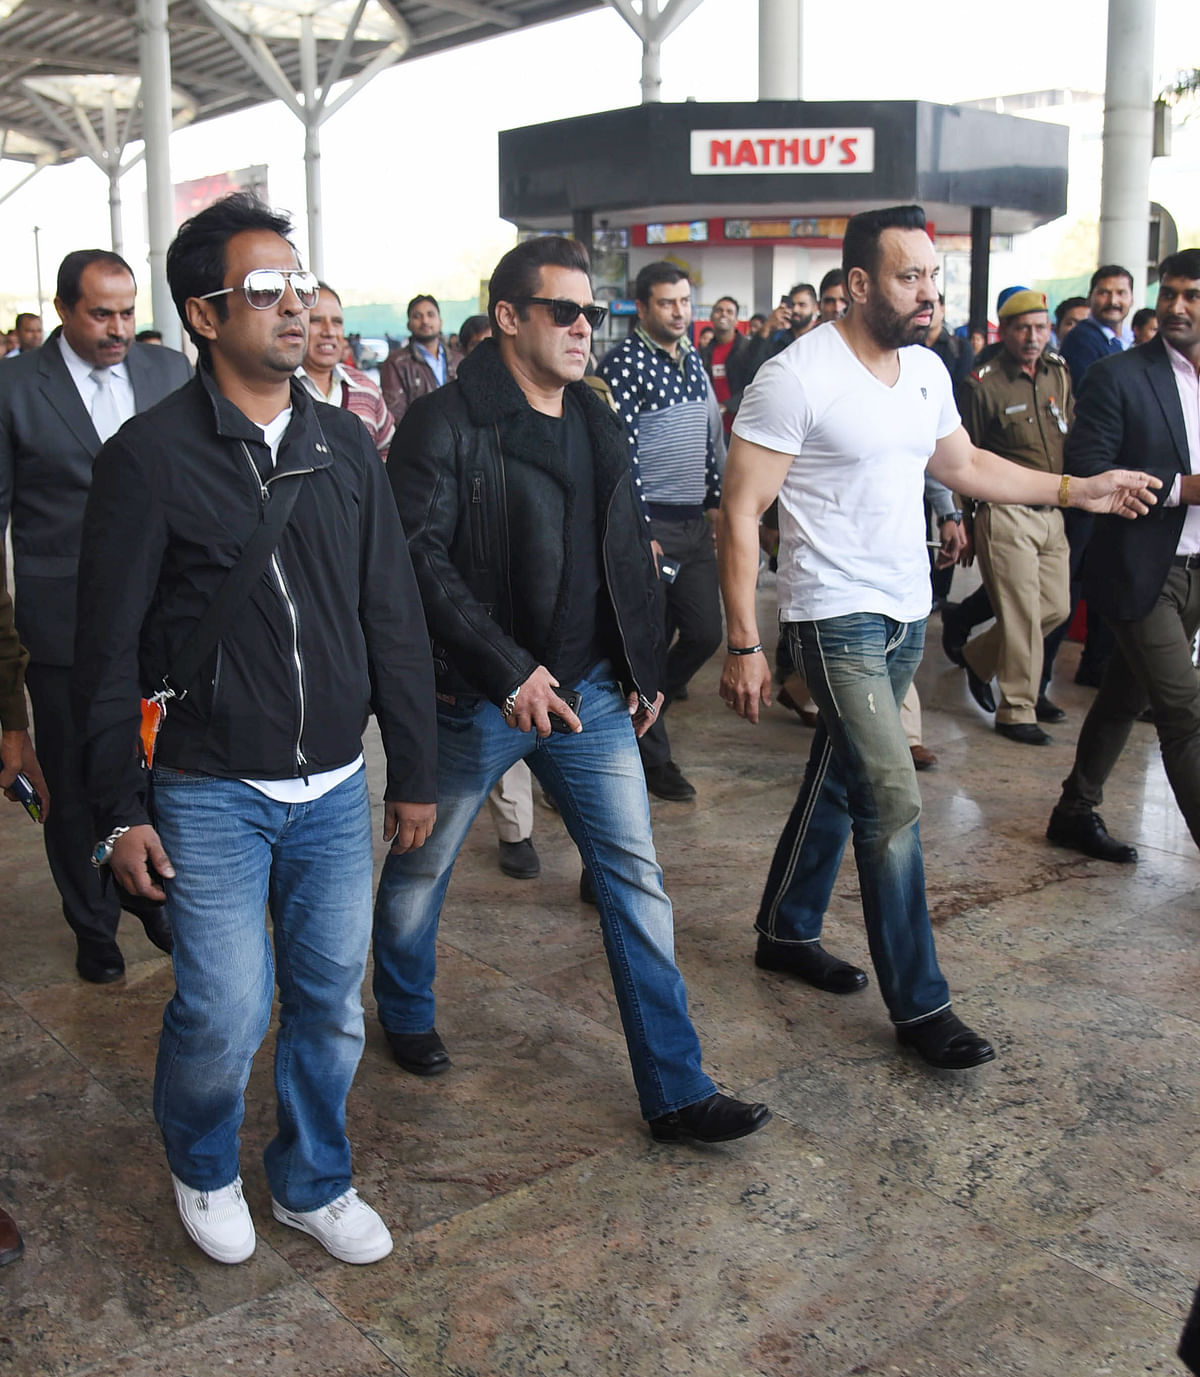 Salman Khan and team will be performing in Delhi.